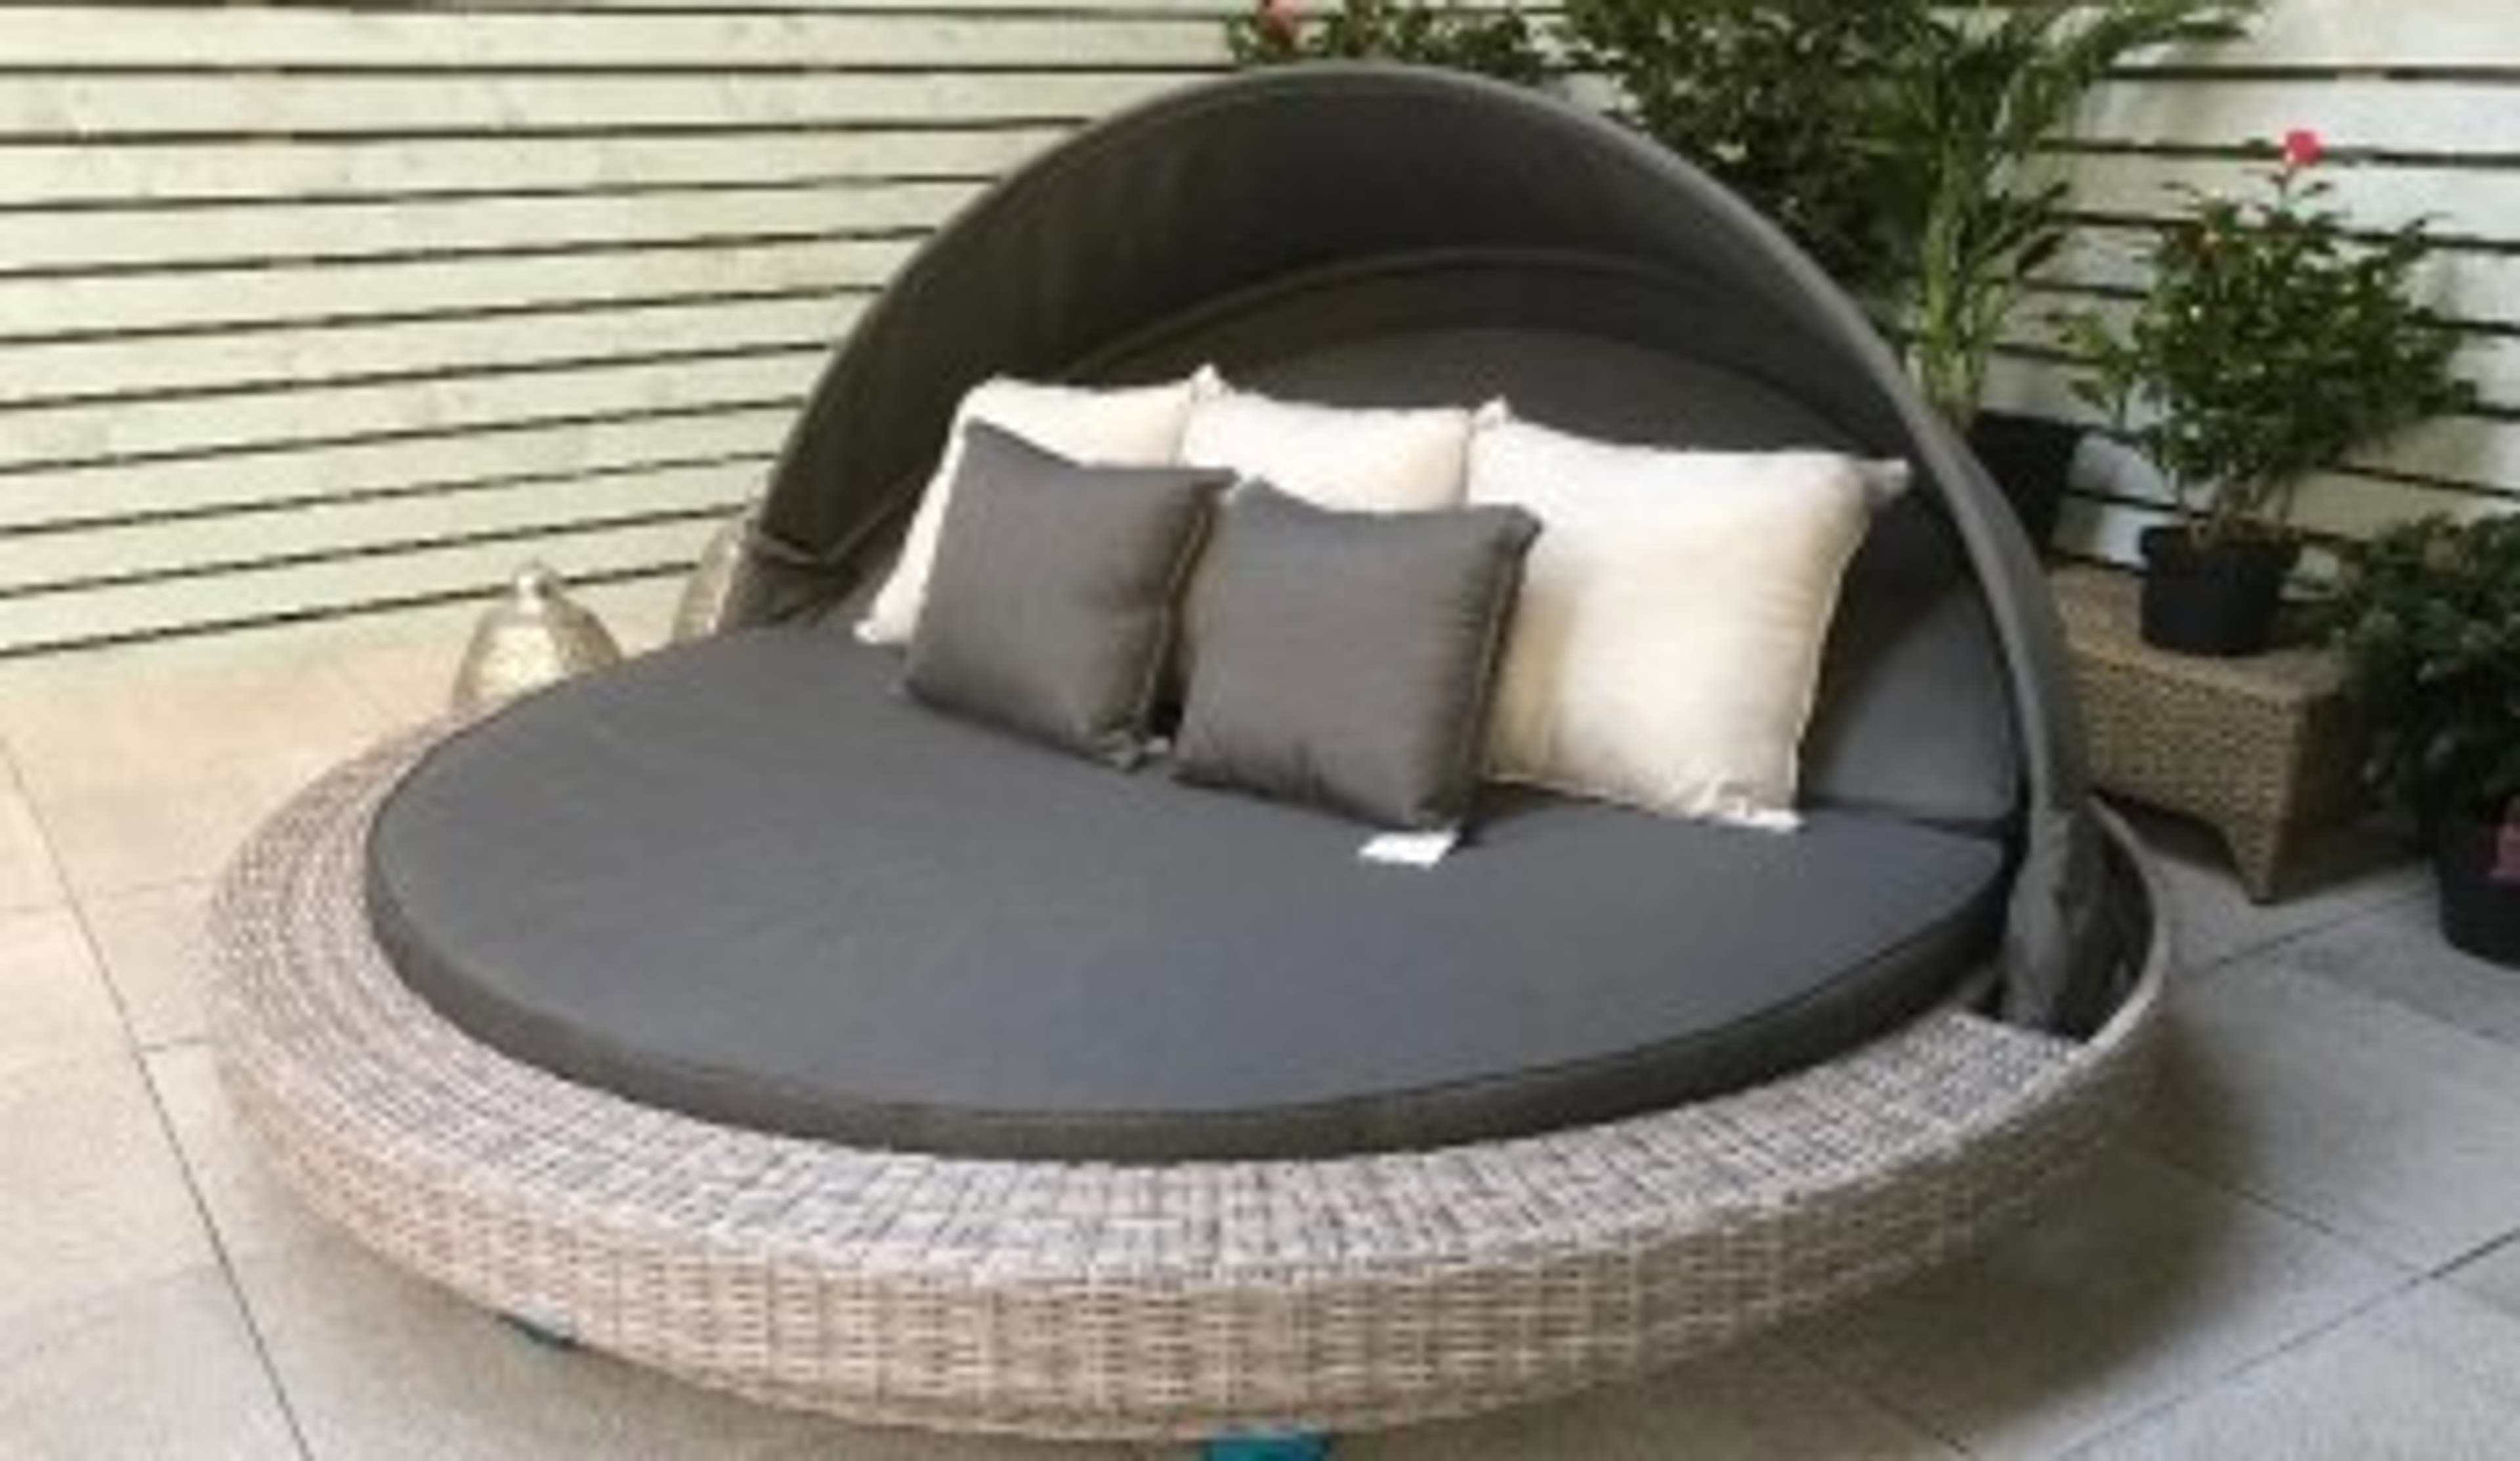  Signature Weave Madison Large Round Daybed by Mattressman 